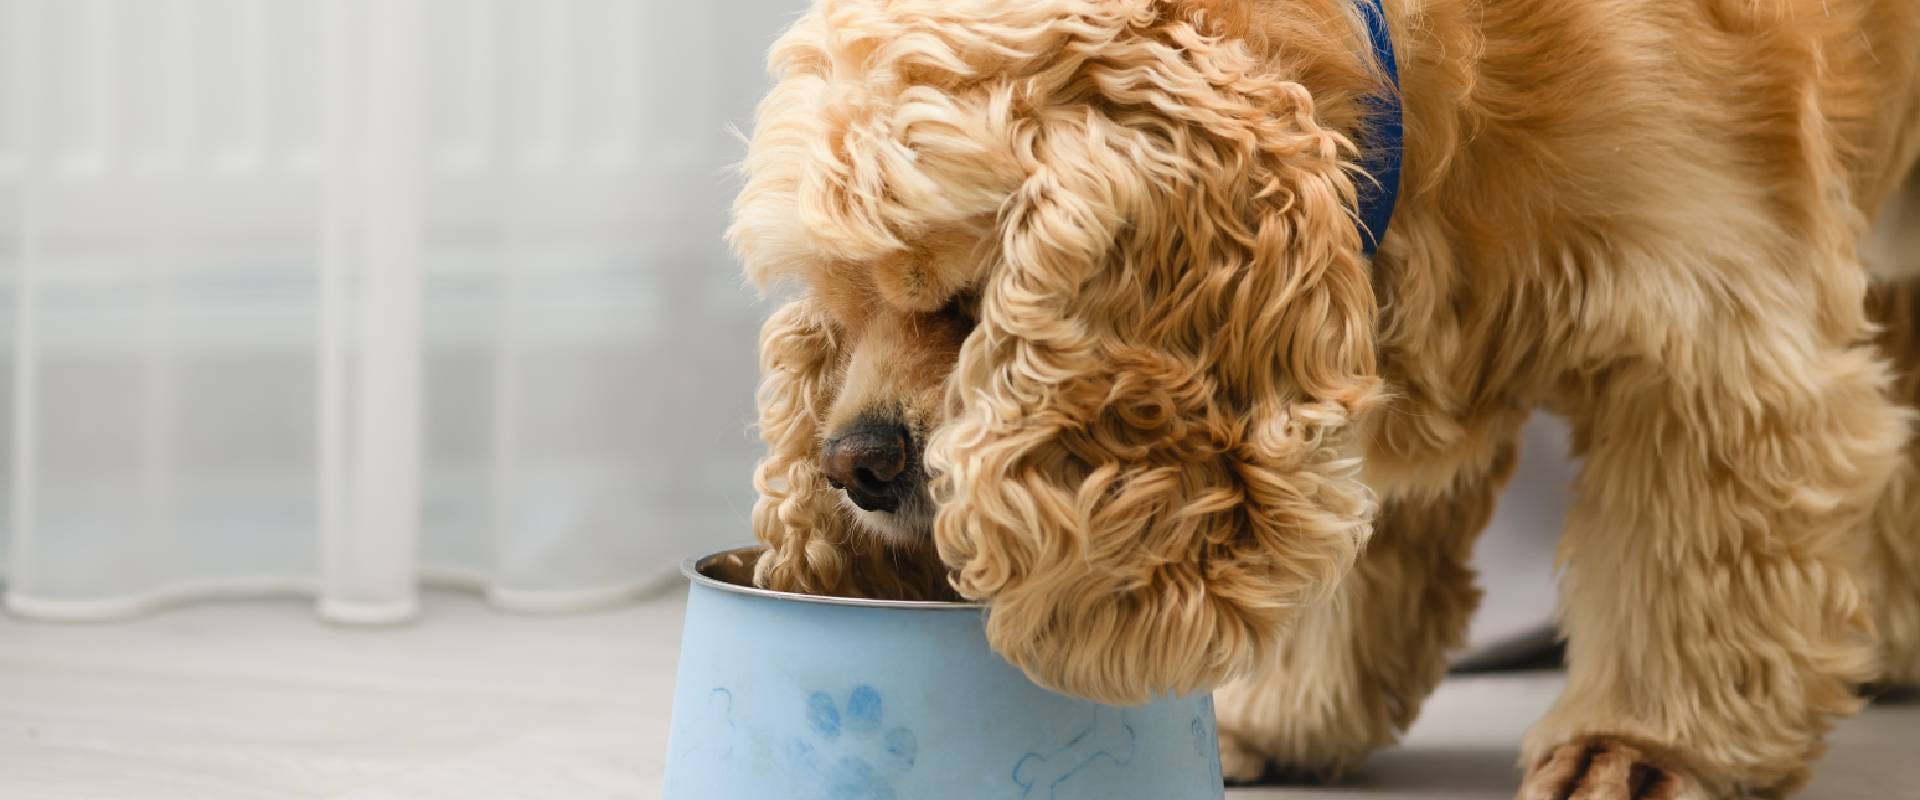 Fluffy dog eating from a blue bowl